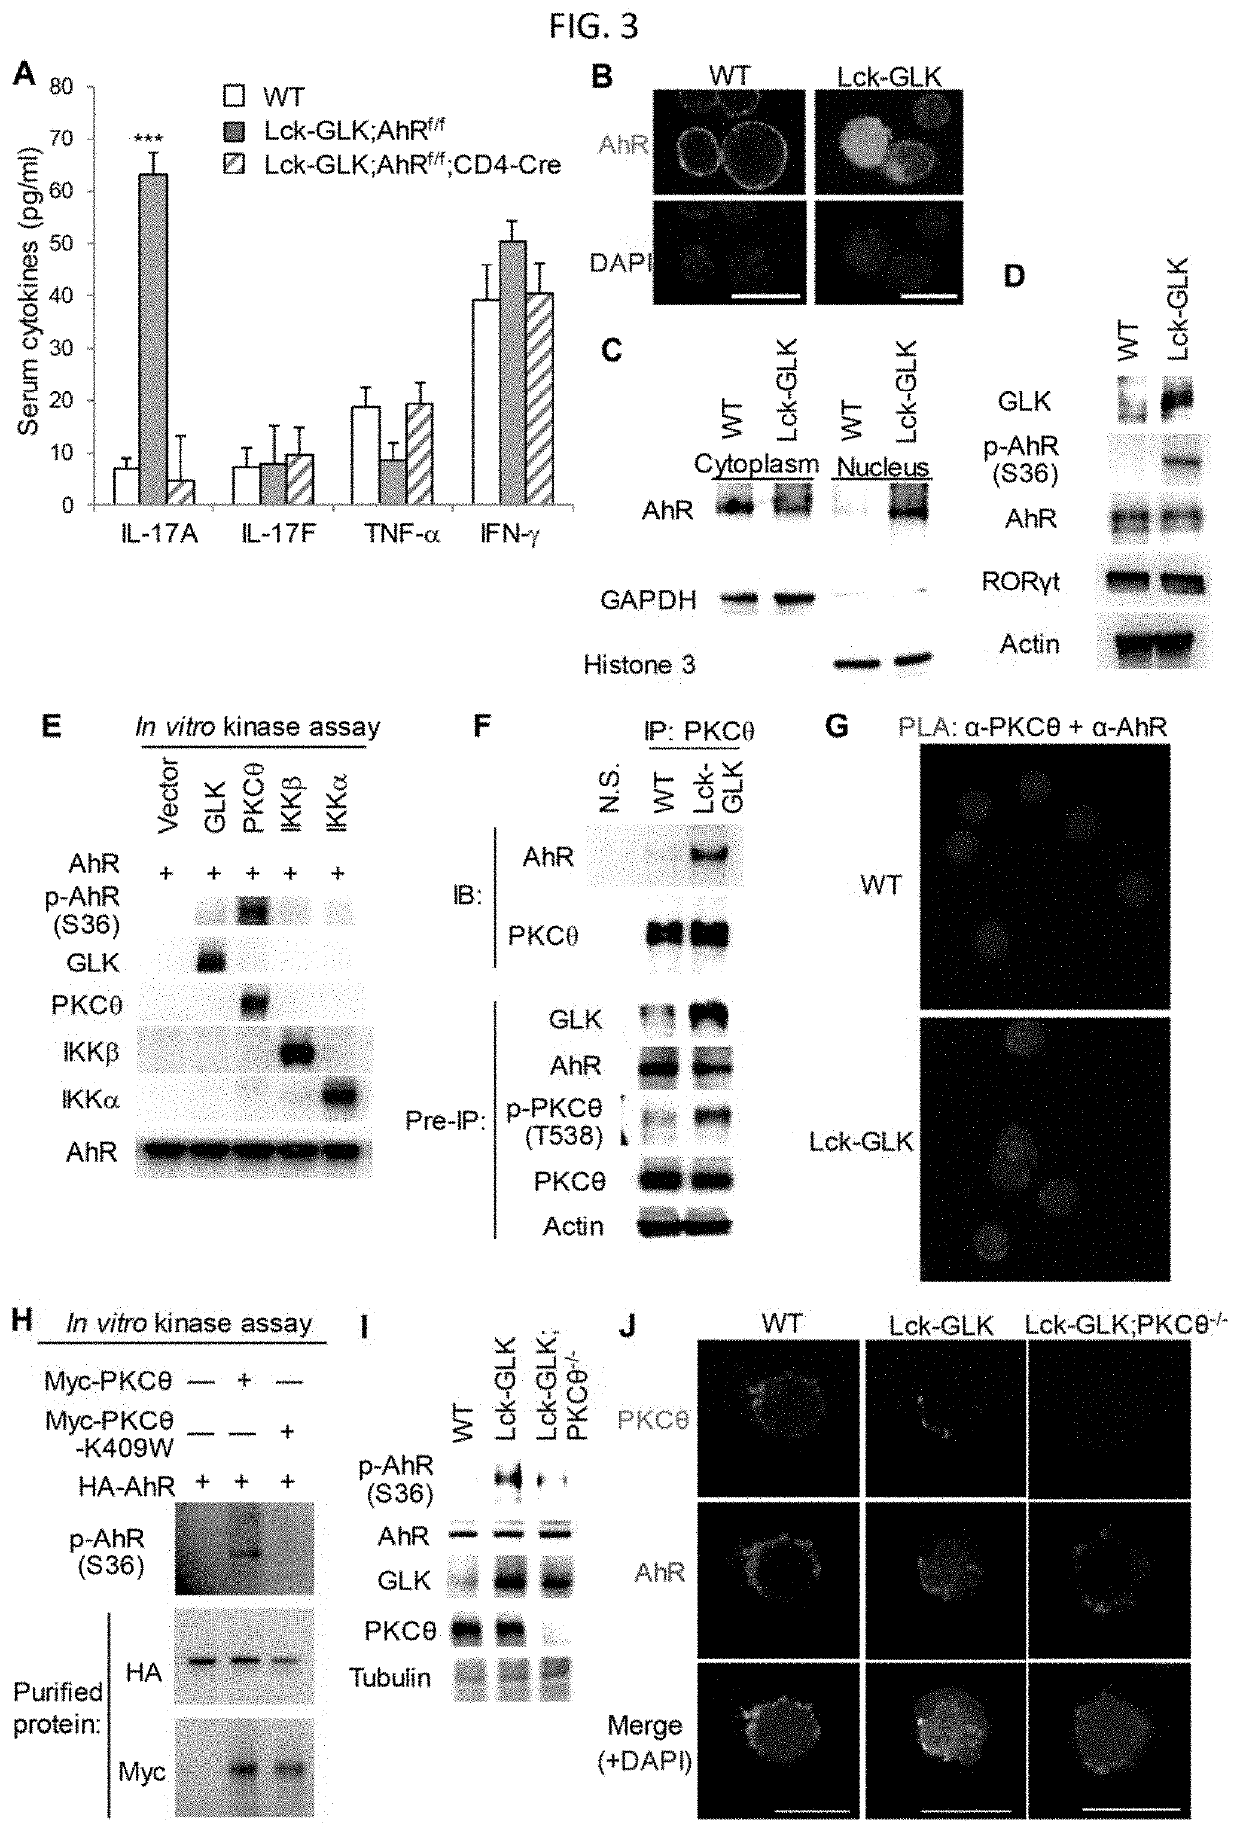 AhR-ROR-γt complex as a biomarker and therapeutic target for autoimmune disease and IL-17A-associated disease